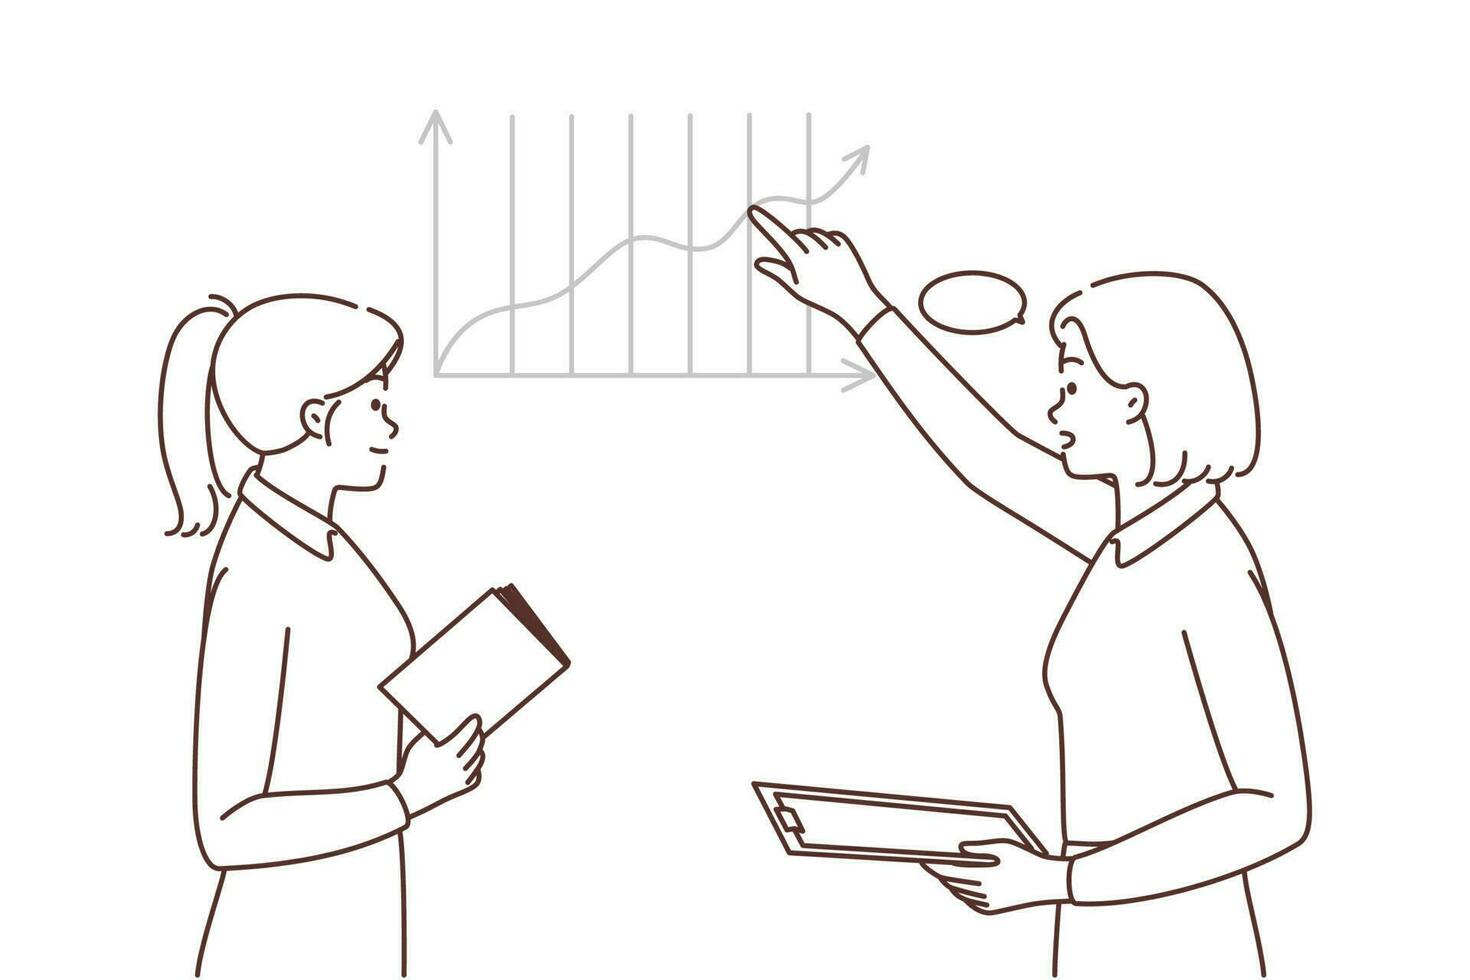 Businesswomen discuss diagram on board in office. Employees or colleagues engaged in teambuilding activity brainstorm in boardroom. Vector illustration.